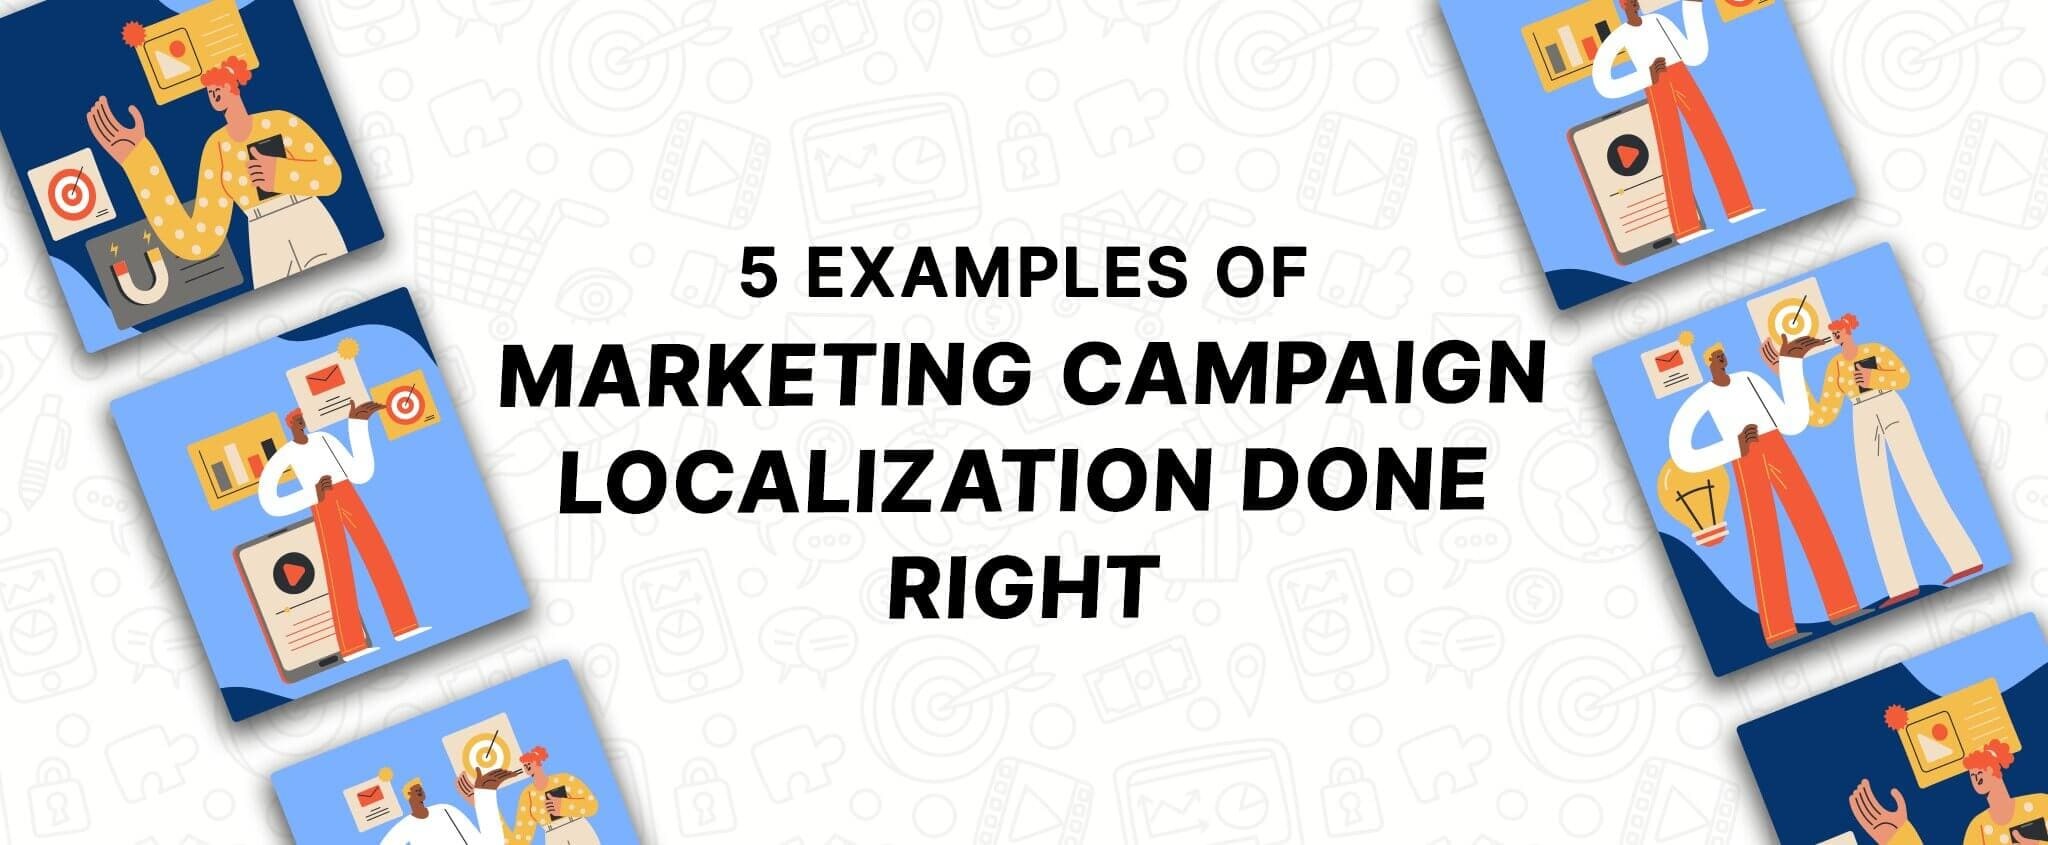 5 Examples of Marketing Campaign Localization Done Right